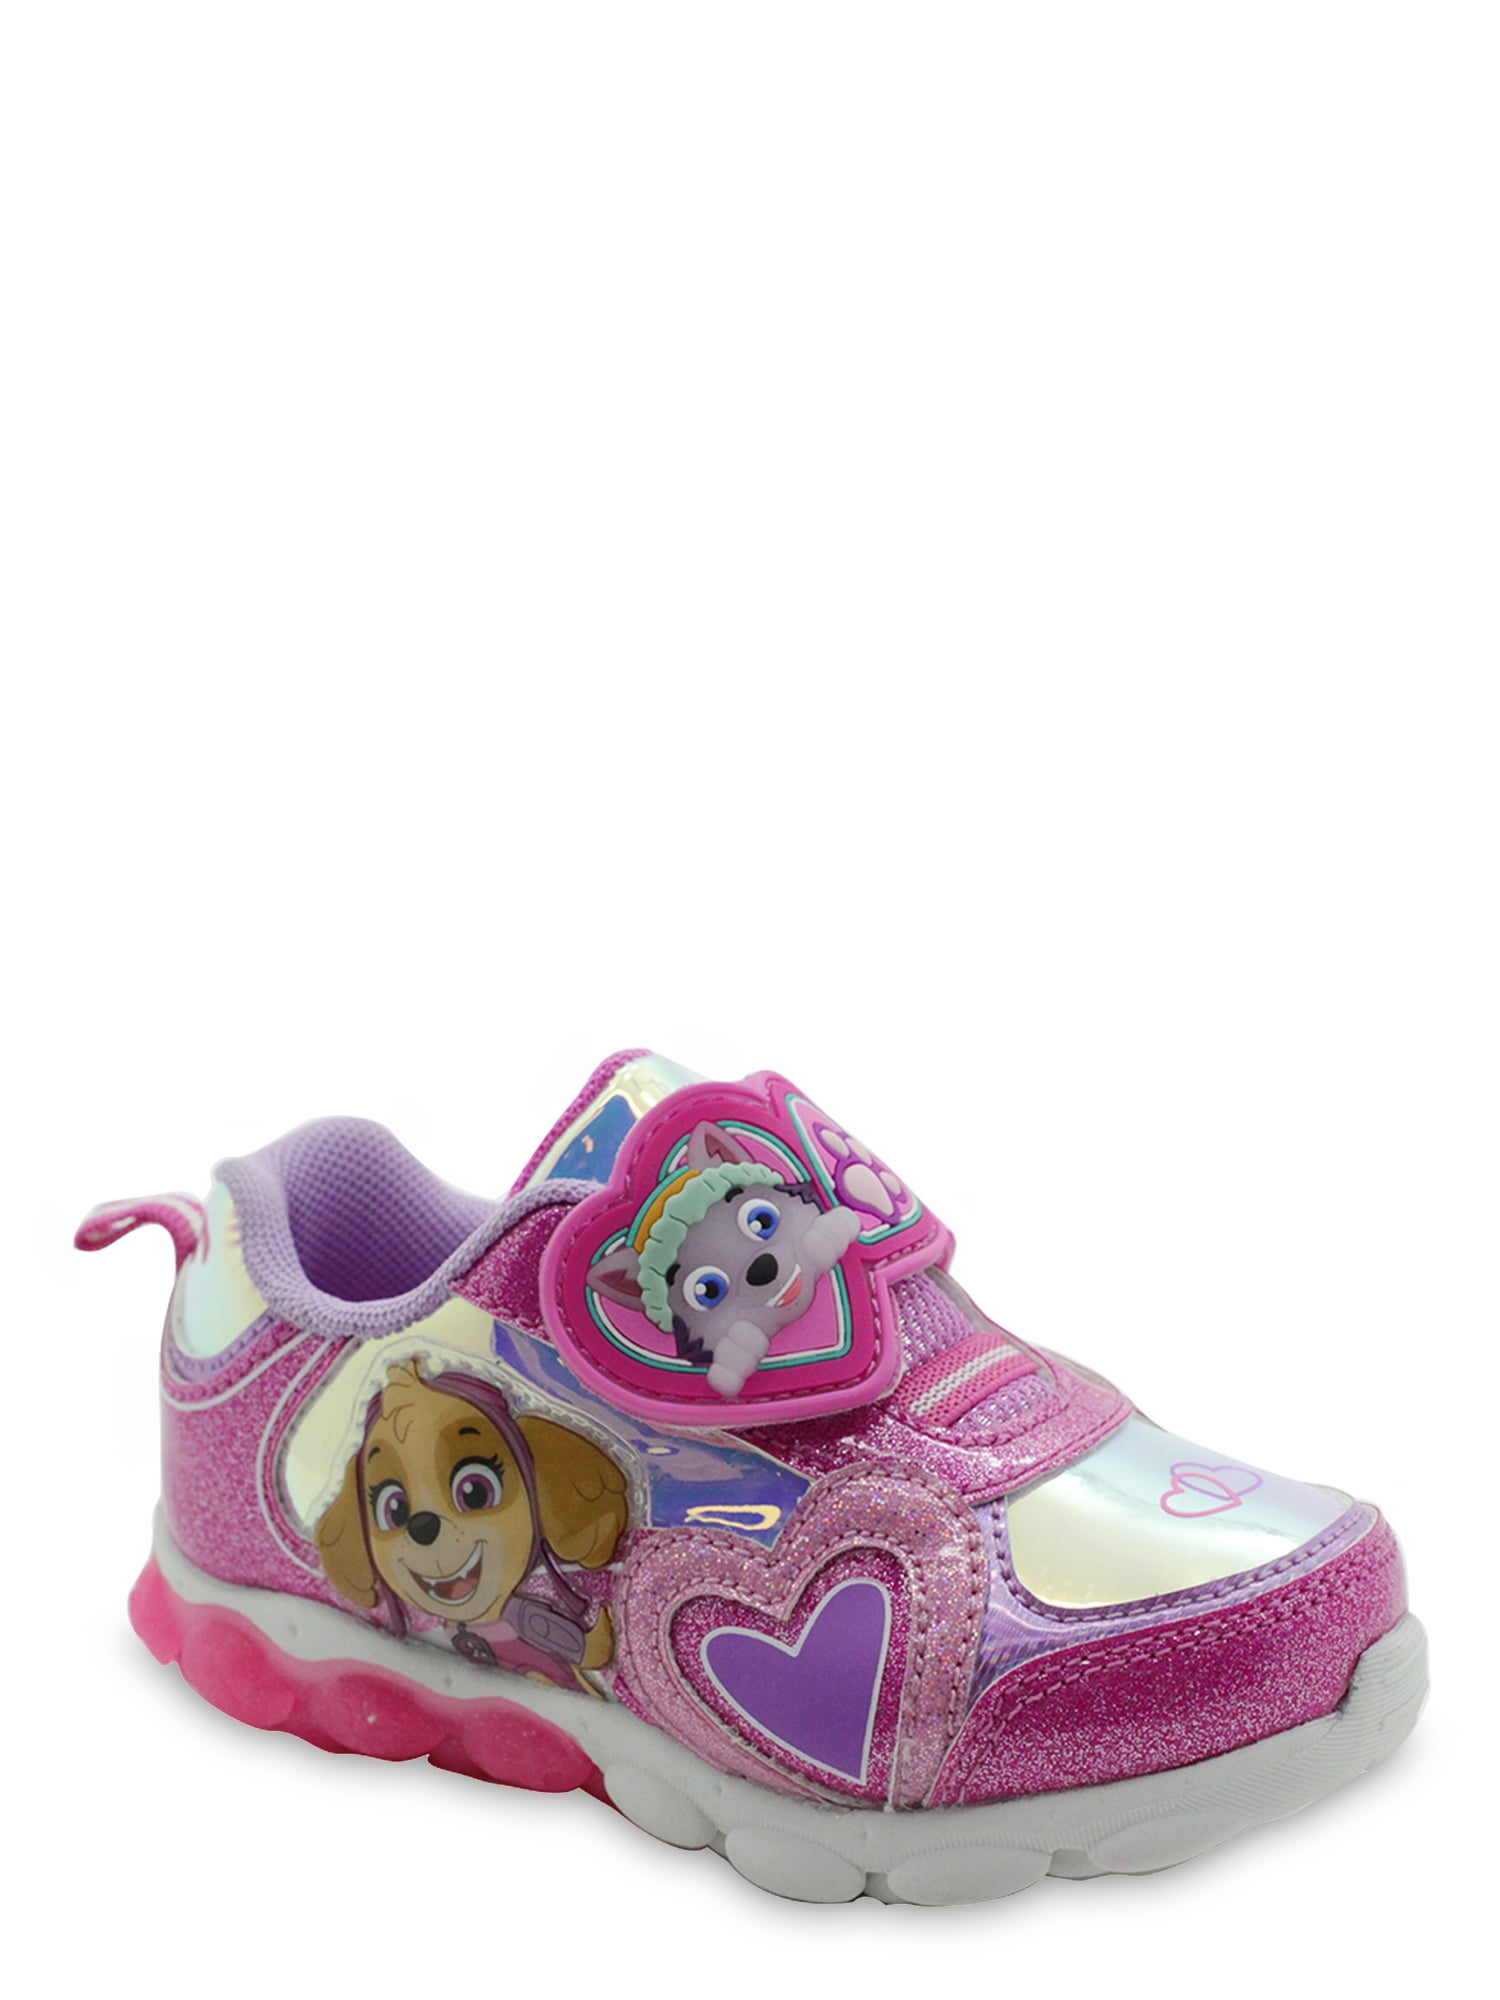 Girls Baby Shark Light Up Trainers Kids Easy Fasten Flashing Lights Sports Shoes